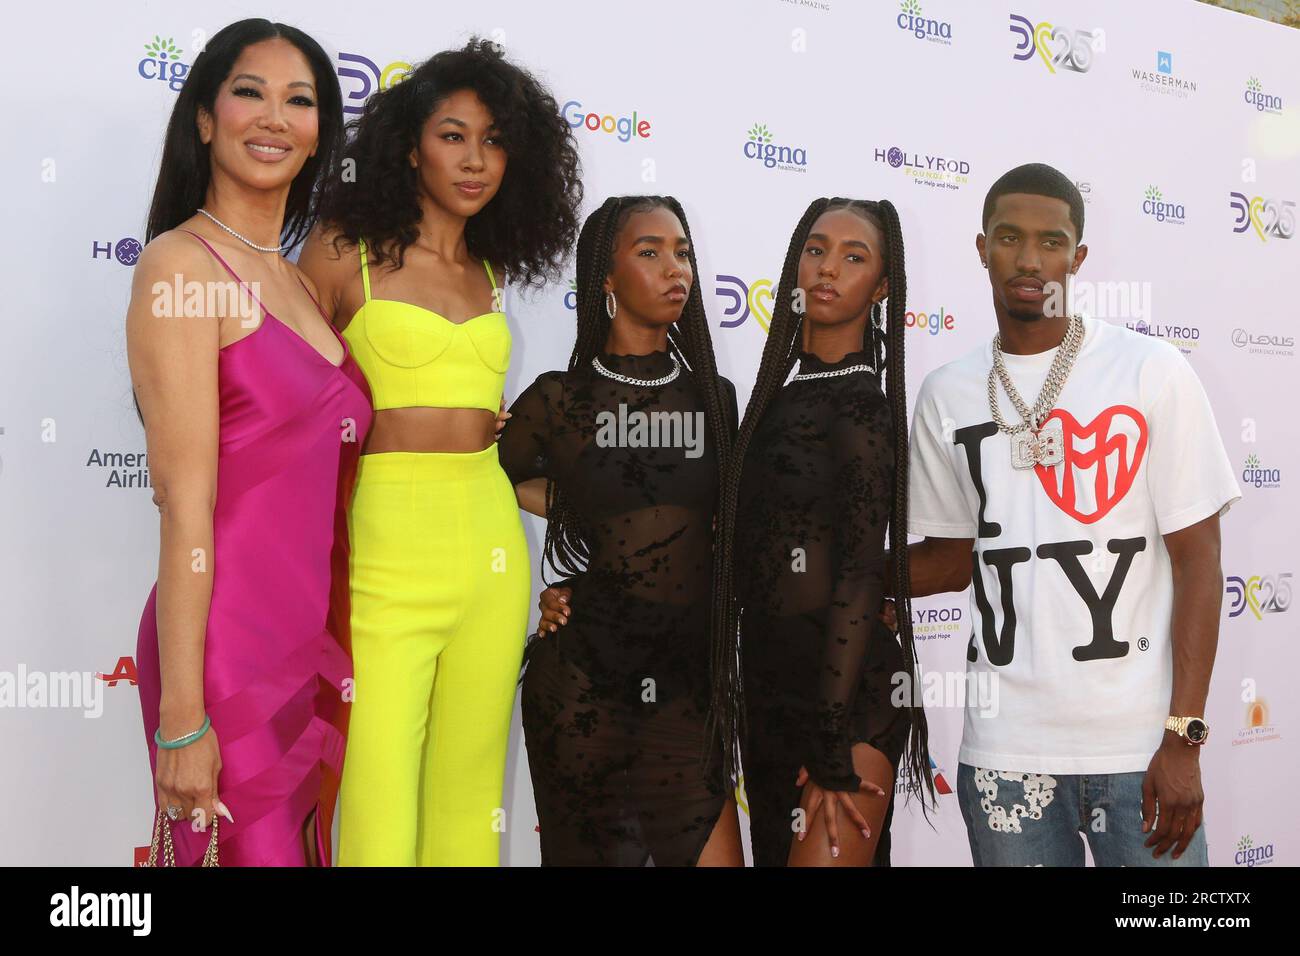 Los Angeles, CA. 15th July, 2023. Kimora Lee Simmons, Aoki Lee Simmons, Jessie Combs, Christian Combs, D'Lila Combs at arrivals for HollyRod Annual DesignCare Gala, NeueHouse Hollywood, Los Angeles, CA July 15, 2023. Credit: Priscilla Grant/Everett Collection/Alamy Live News Stock Photo